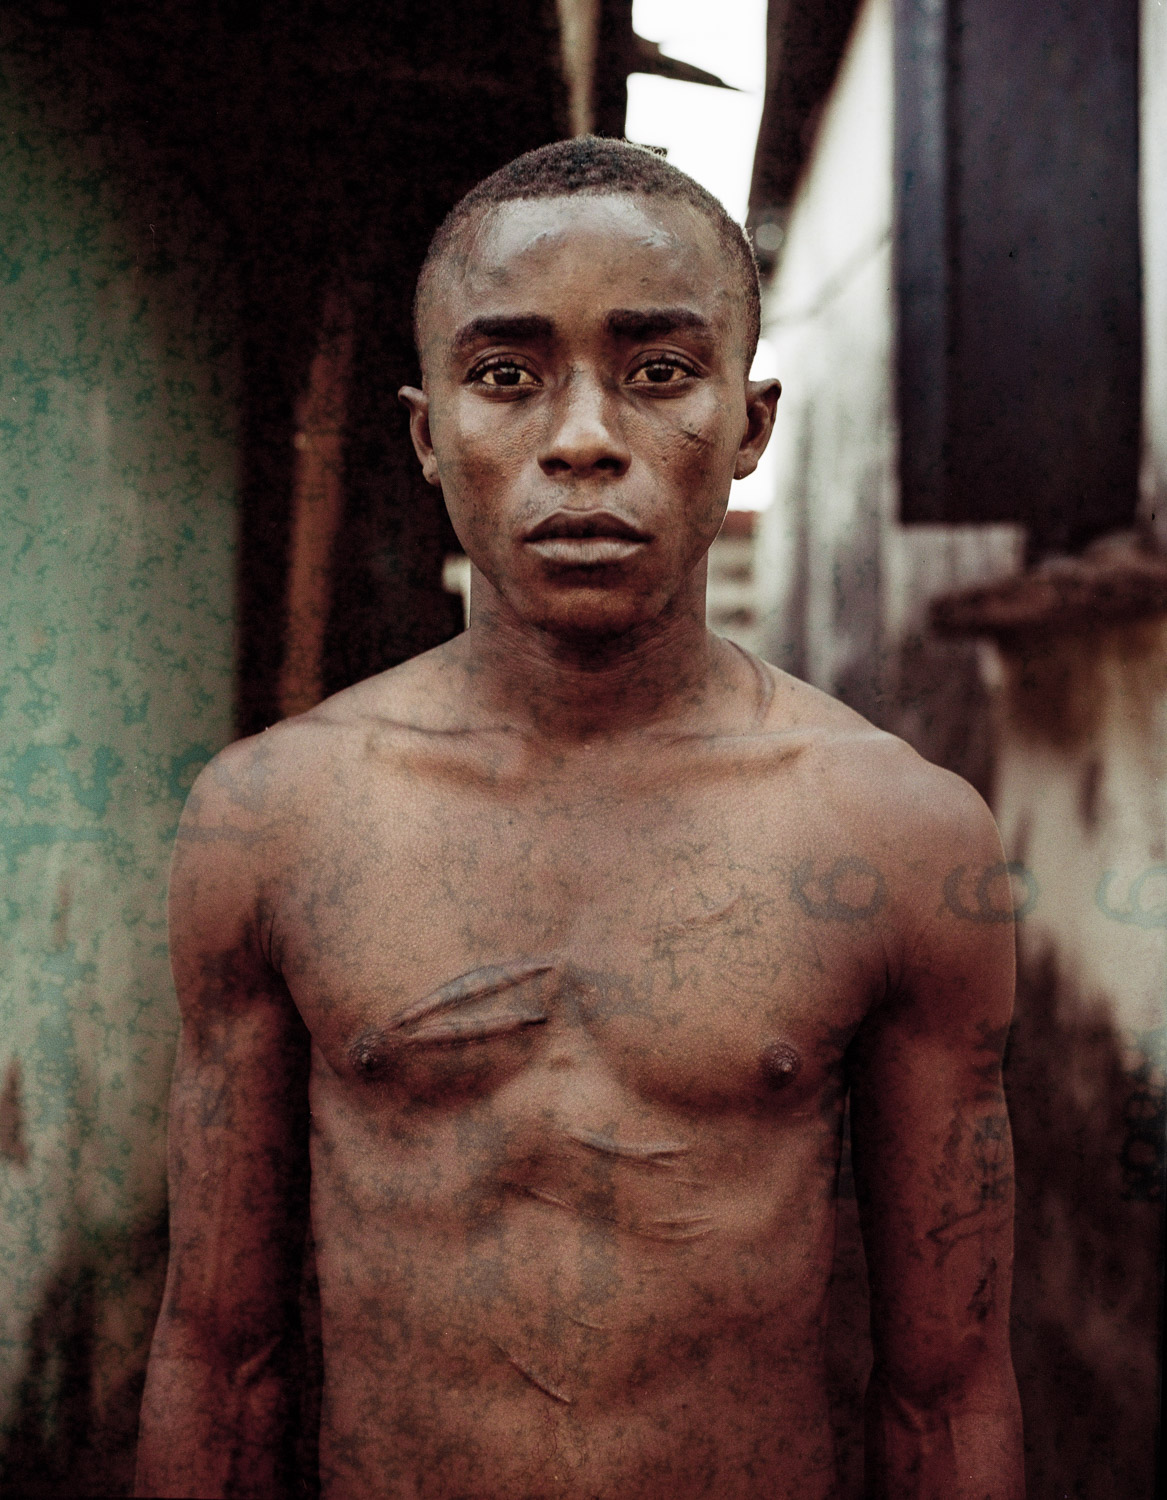 Abdul (21) stands for a portrait in Freetown - Sierra Leone